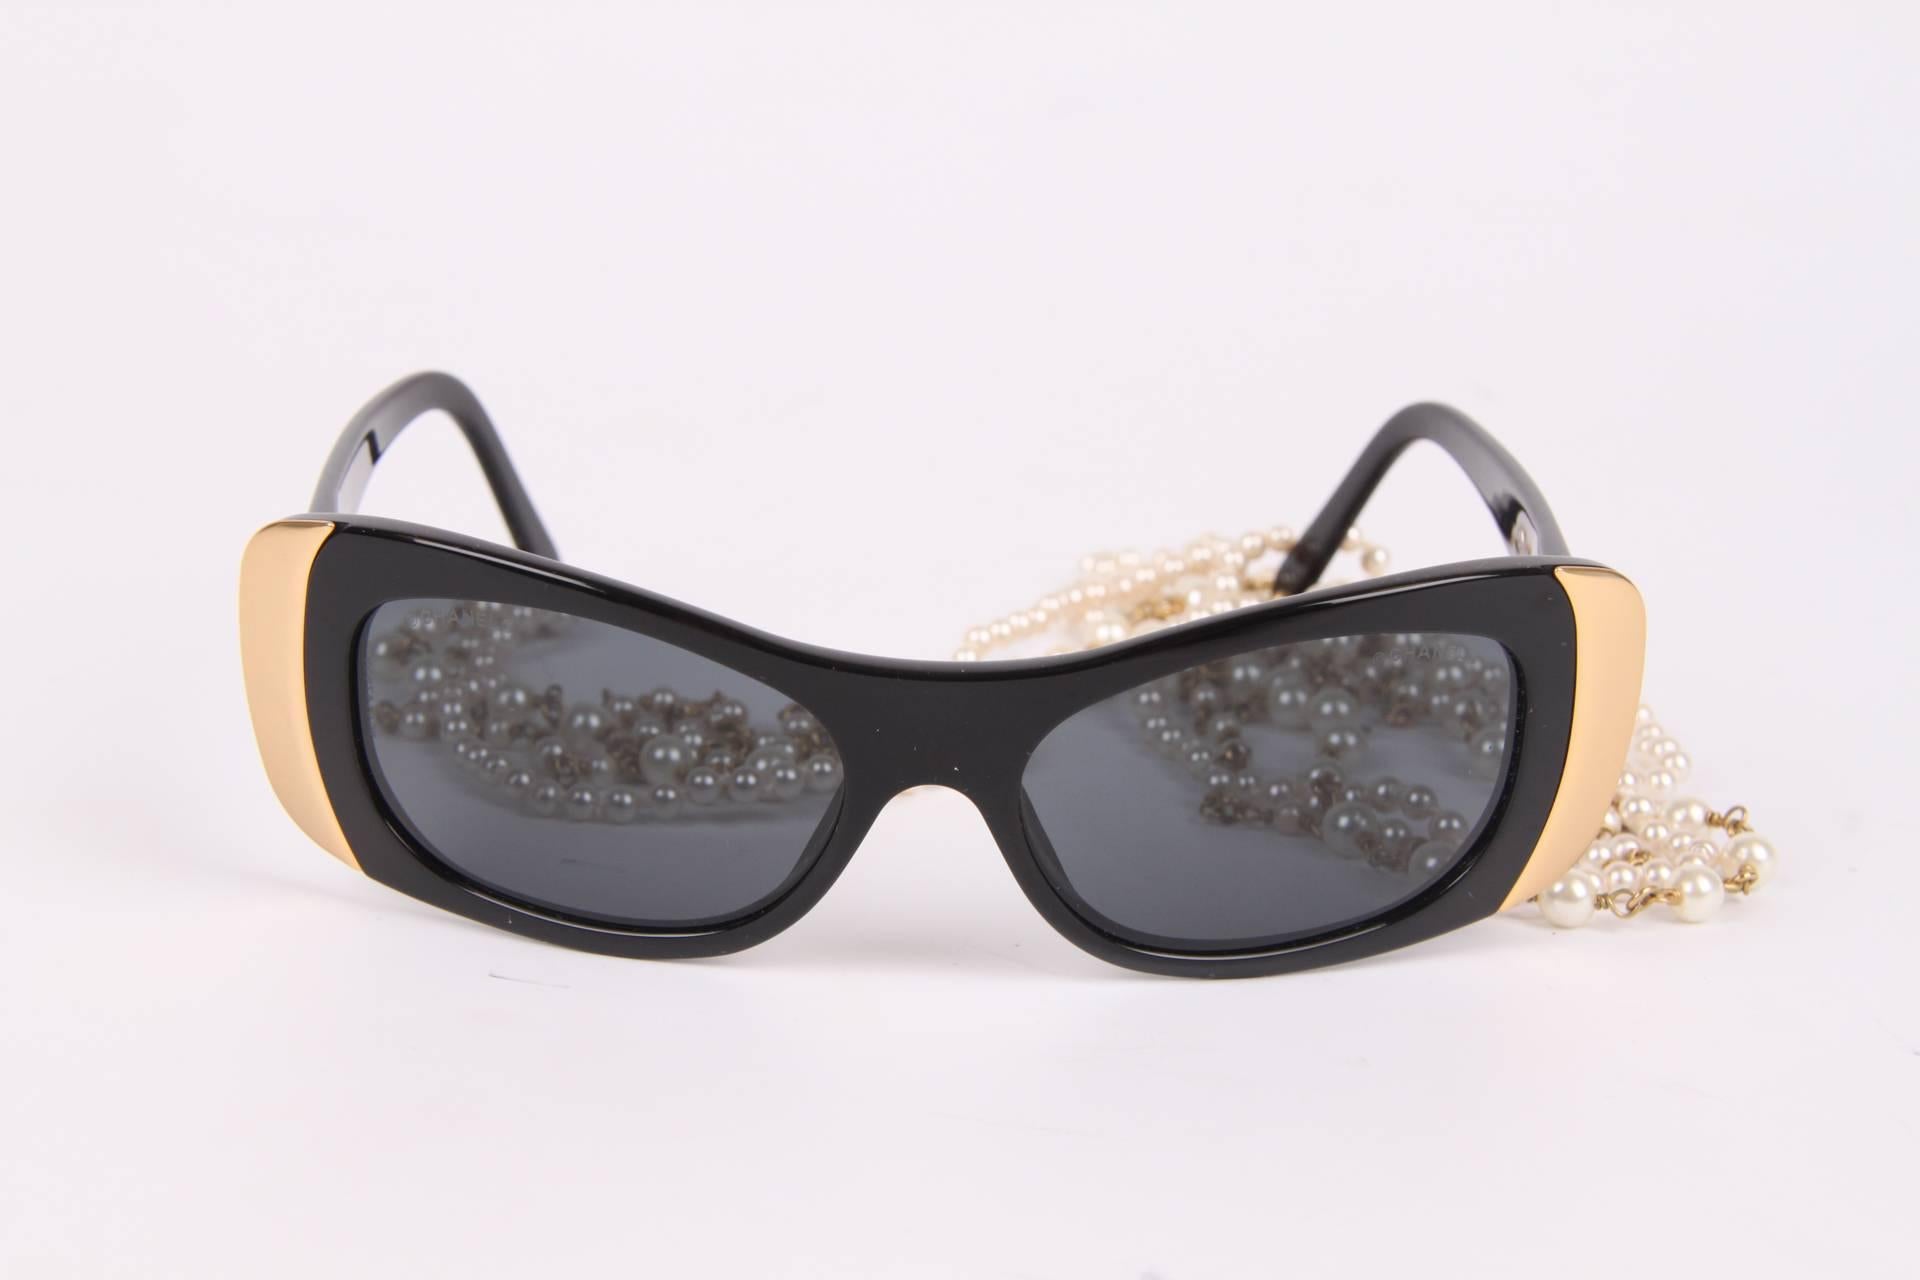 Yesss! We got our hands on another collector's item from the 2005 Spring Summer Pret-a-Porter Collection by Chanel.

These black Chanel sunglasses (model A 28891) are a real statement piece and a tribute to the exuberant decadence of that time. We